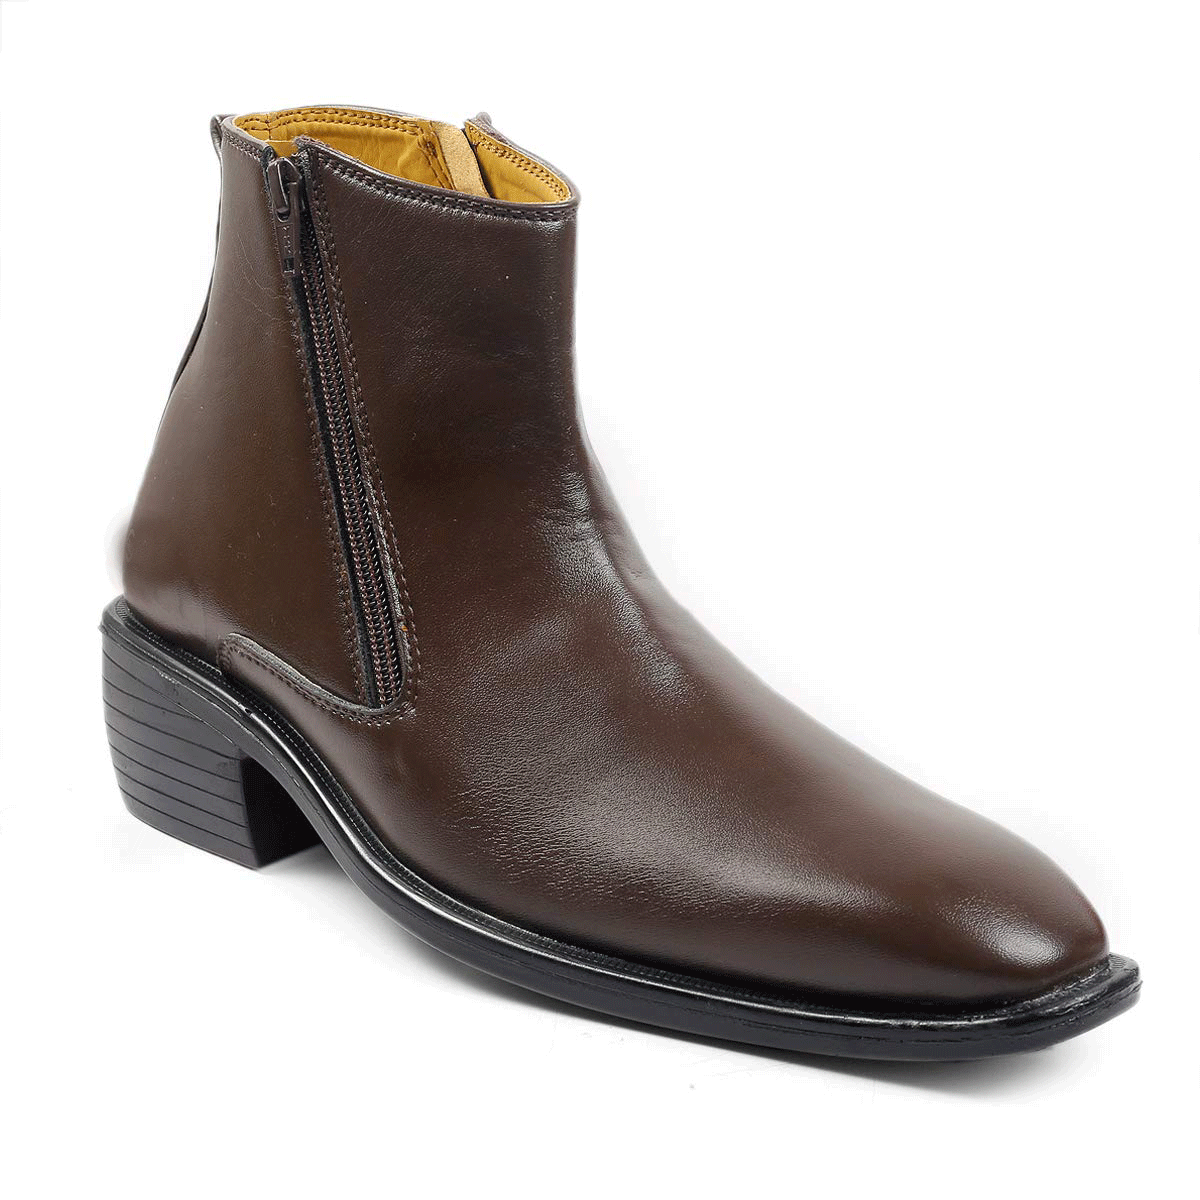 New Arrival Brown Casual Formal Zipper Ankle Boots For Men-Unique and Classy